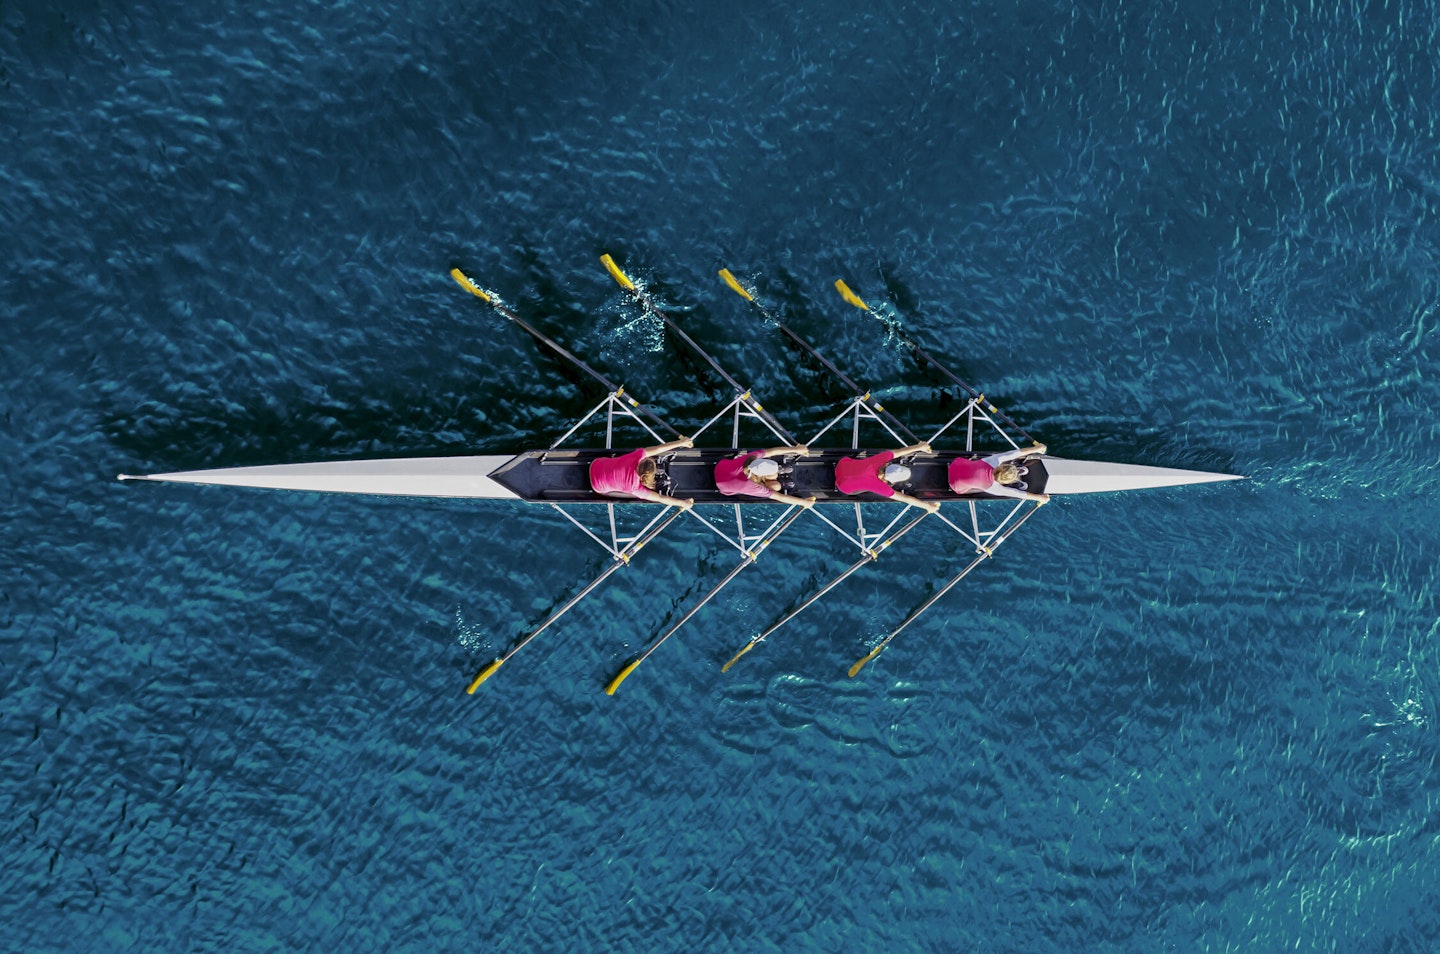 Top view of a rowing team